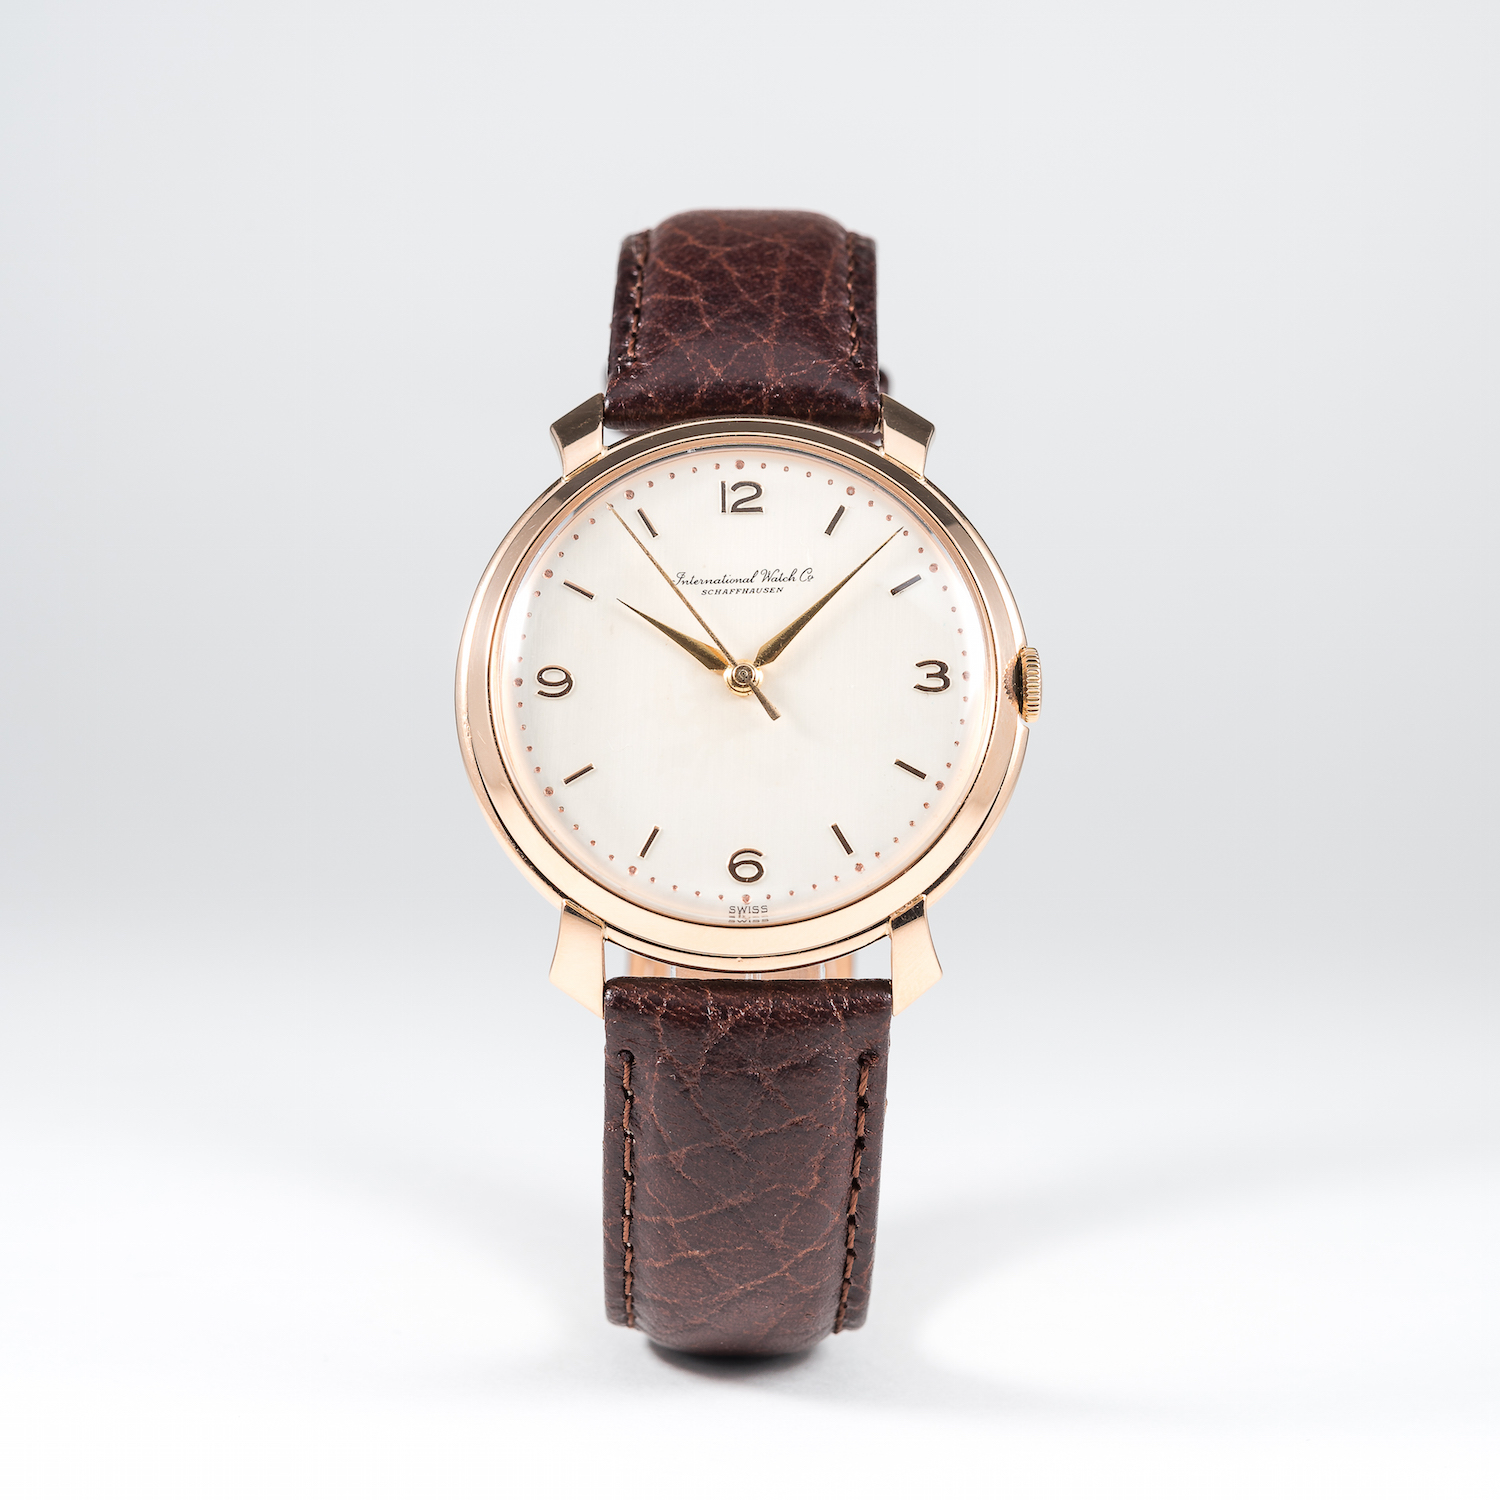 A RARE GENTLEMAN'S LARGE SIZE 18K SOLID PINK GOLD IWC WRIST WATCH CIRCA 1950s 
D: Silver dial with